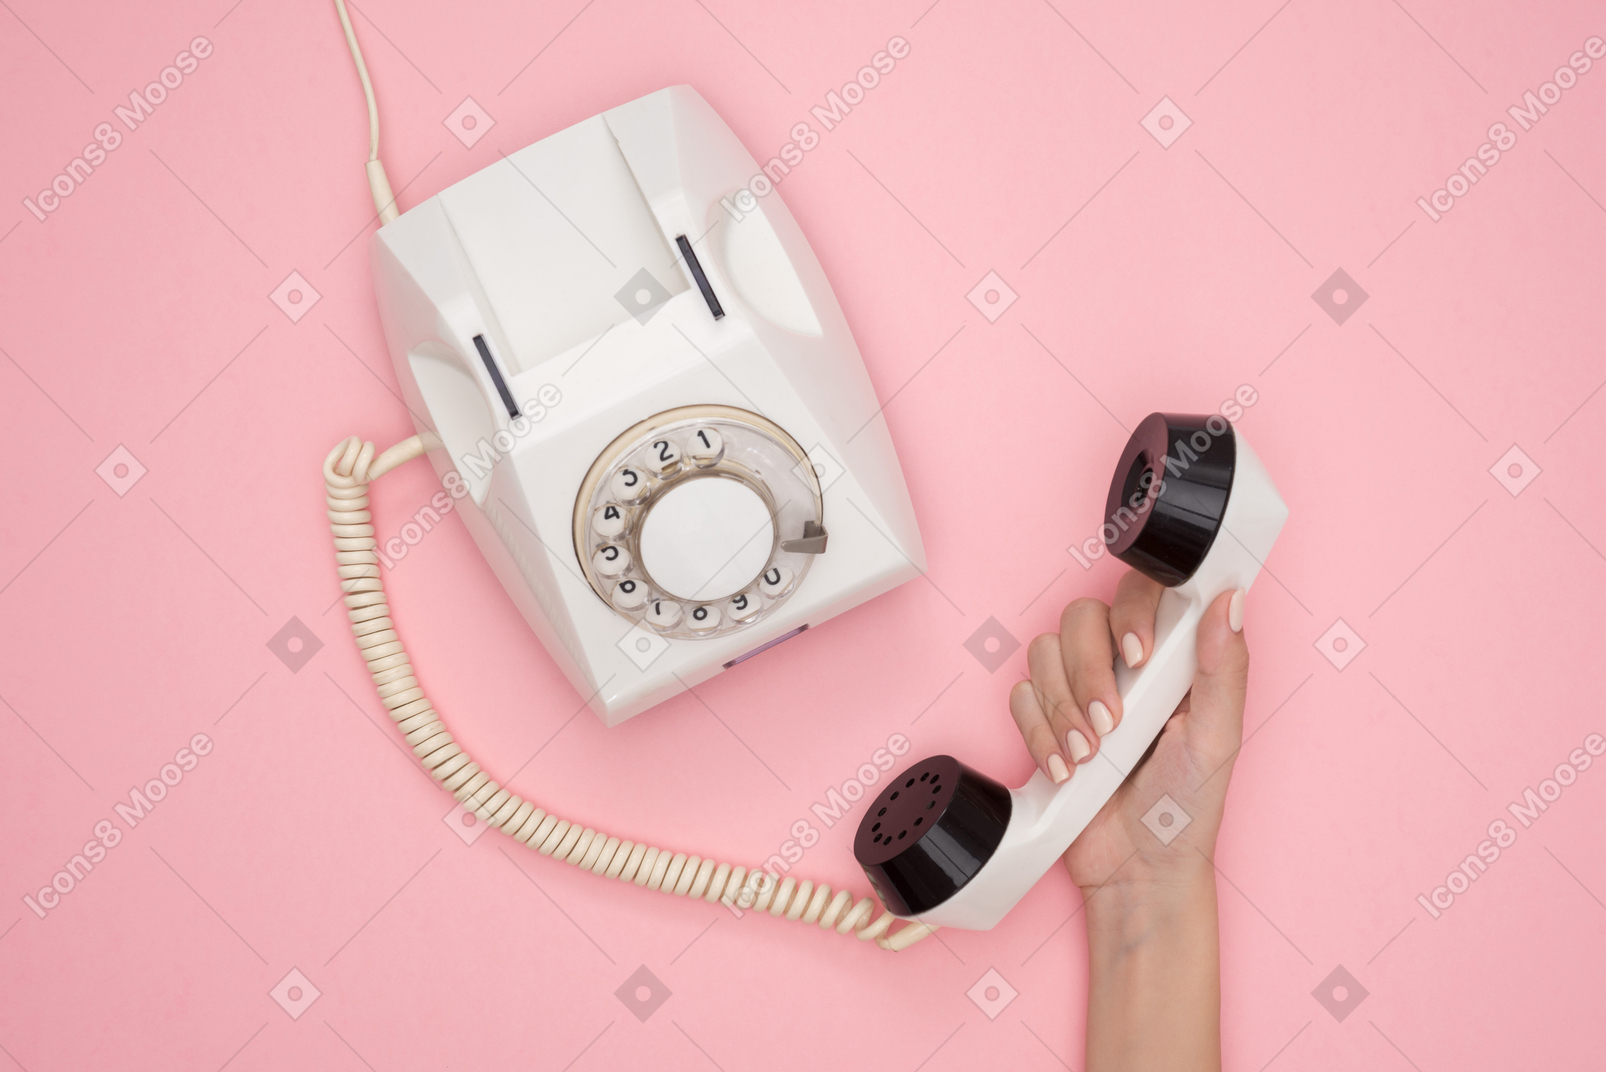 Female hand holding vintage phone receiver